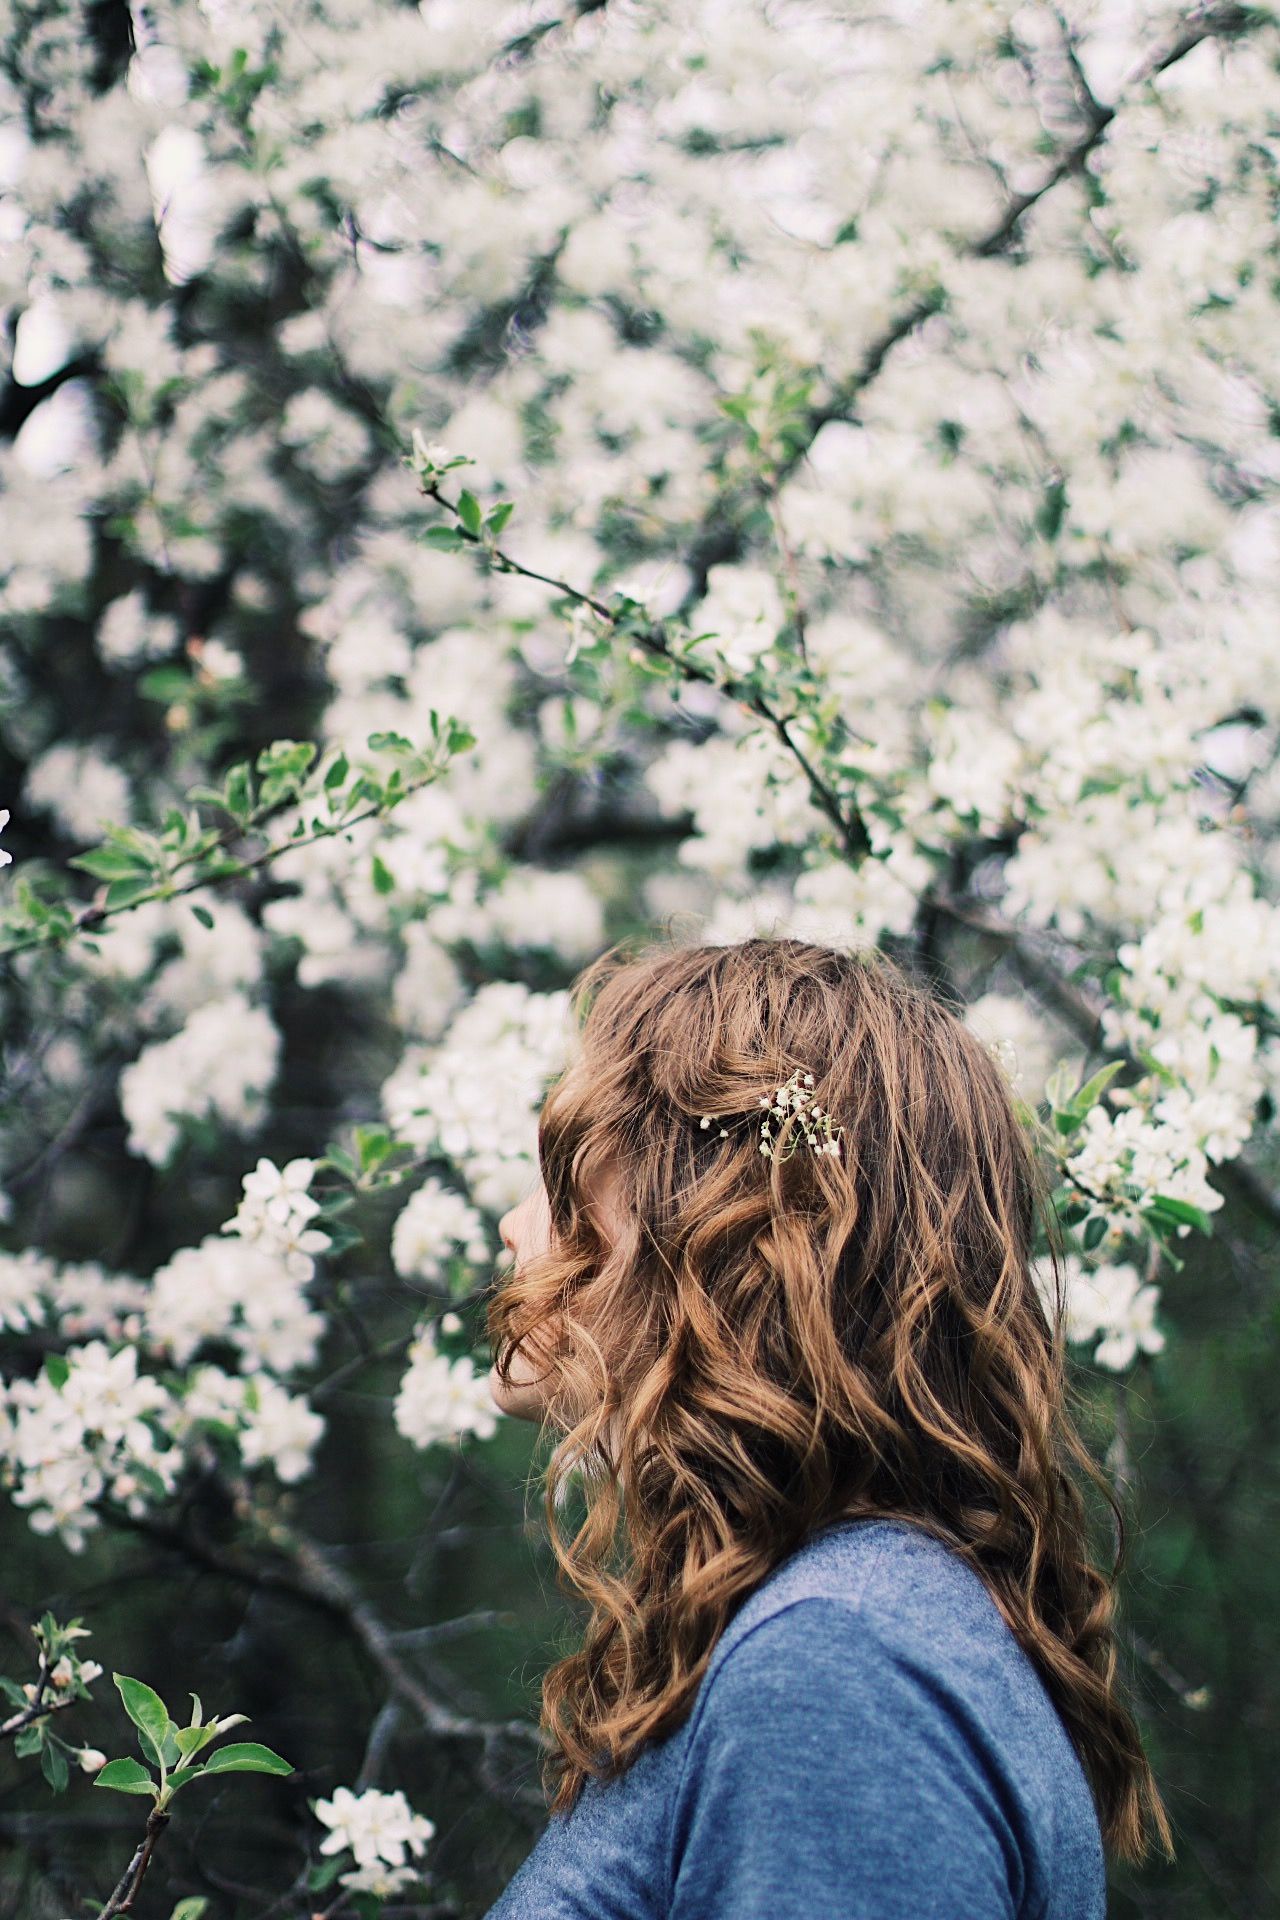 deeann adams recommends tumblr girl photography spring pic